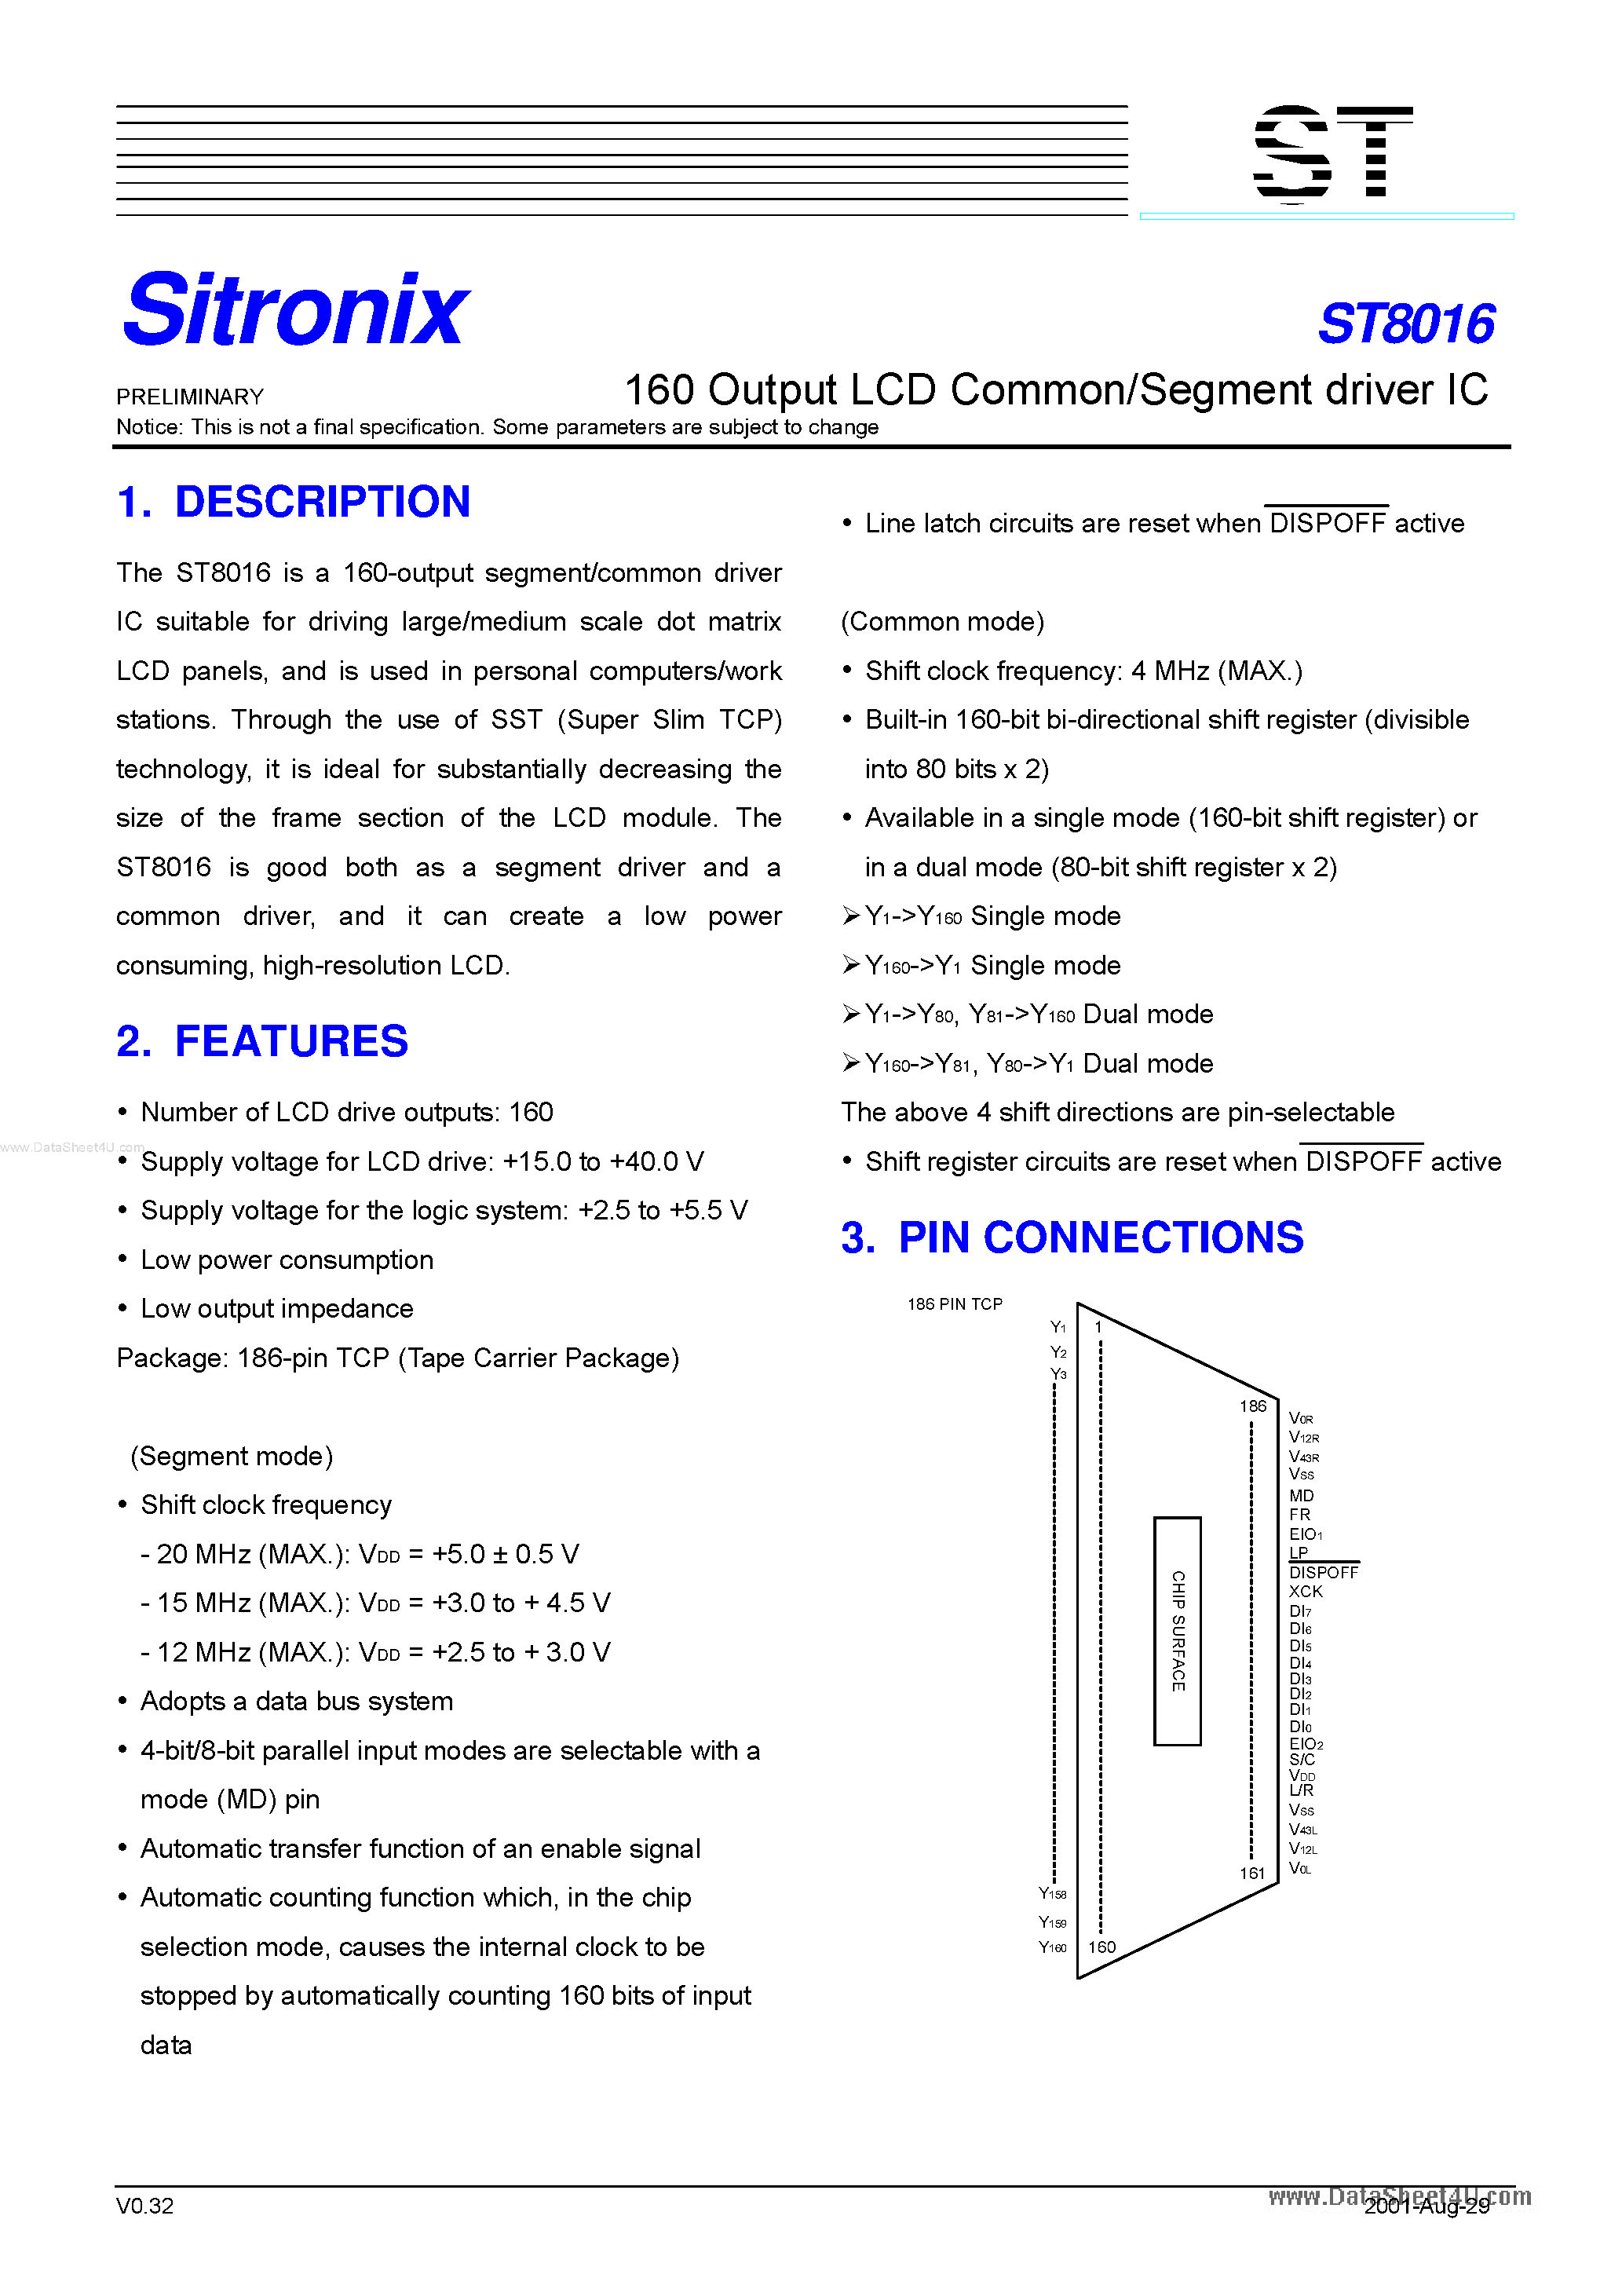 Datasheet ST8016 - 160 Output LCD Common/Segment driver IC page 1